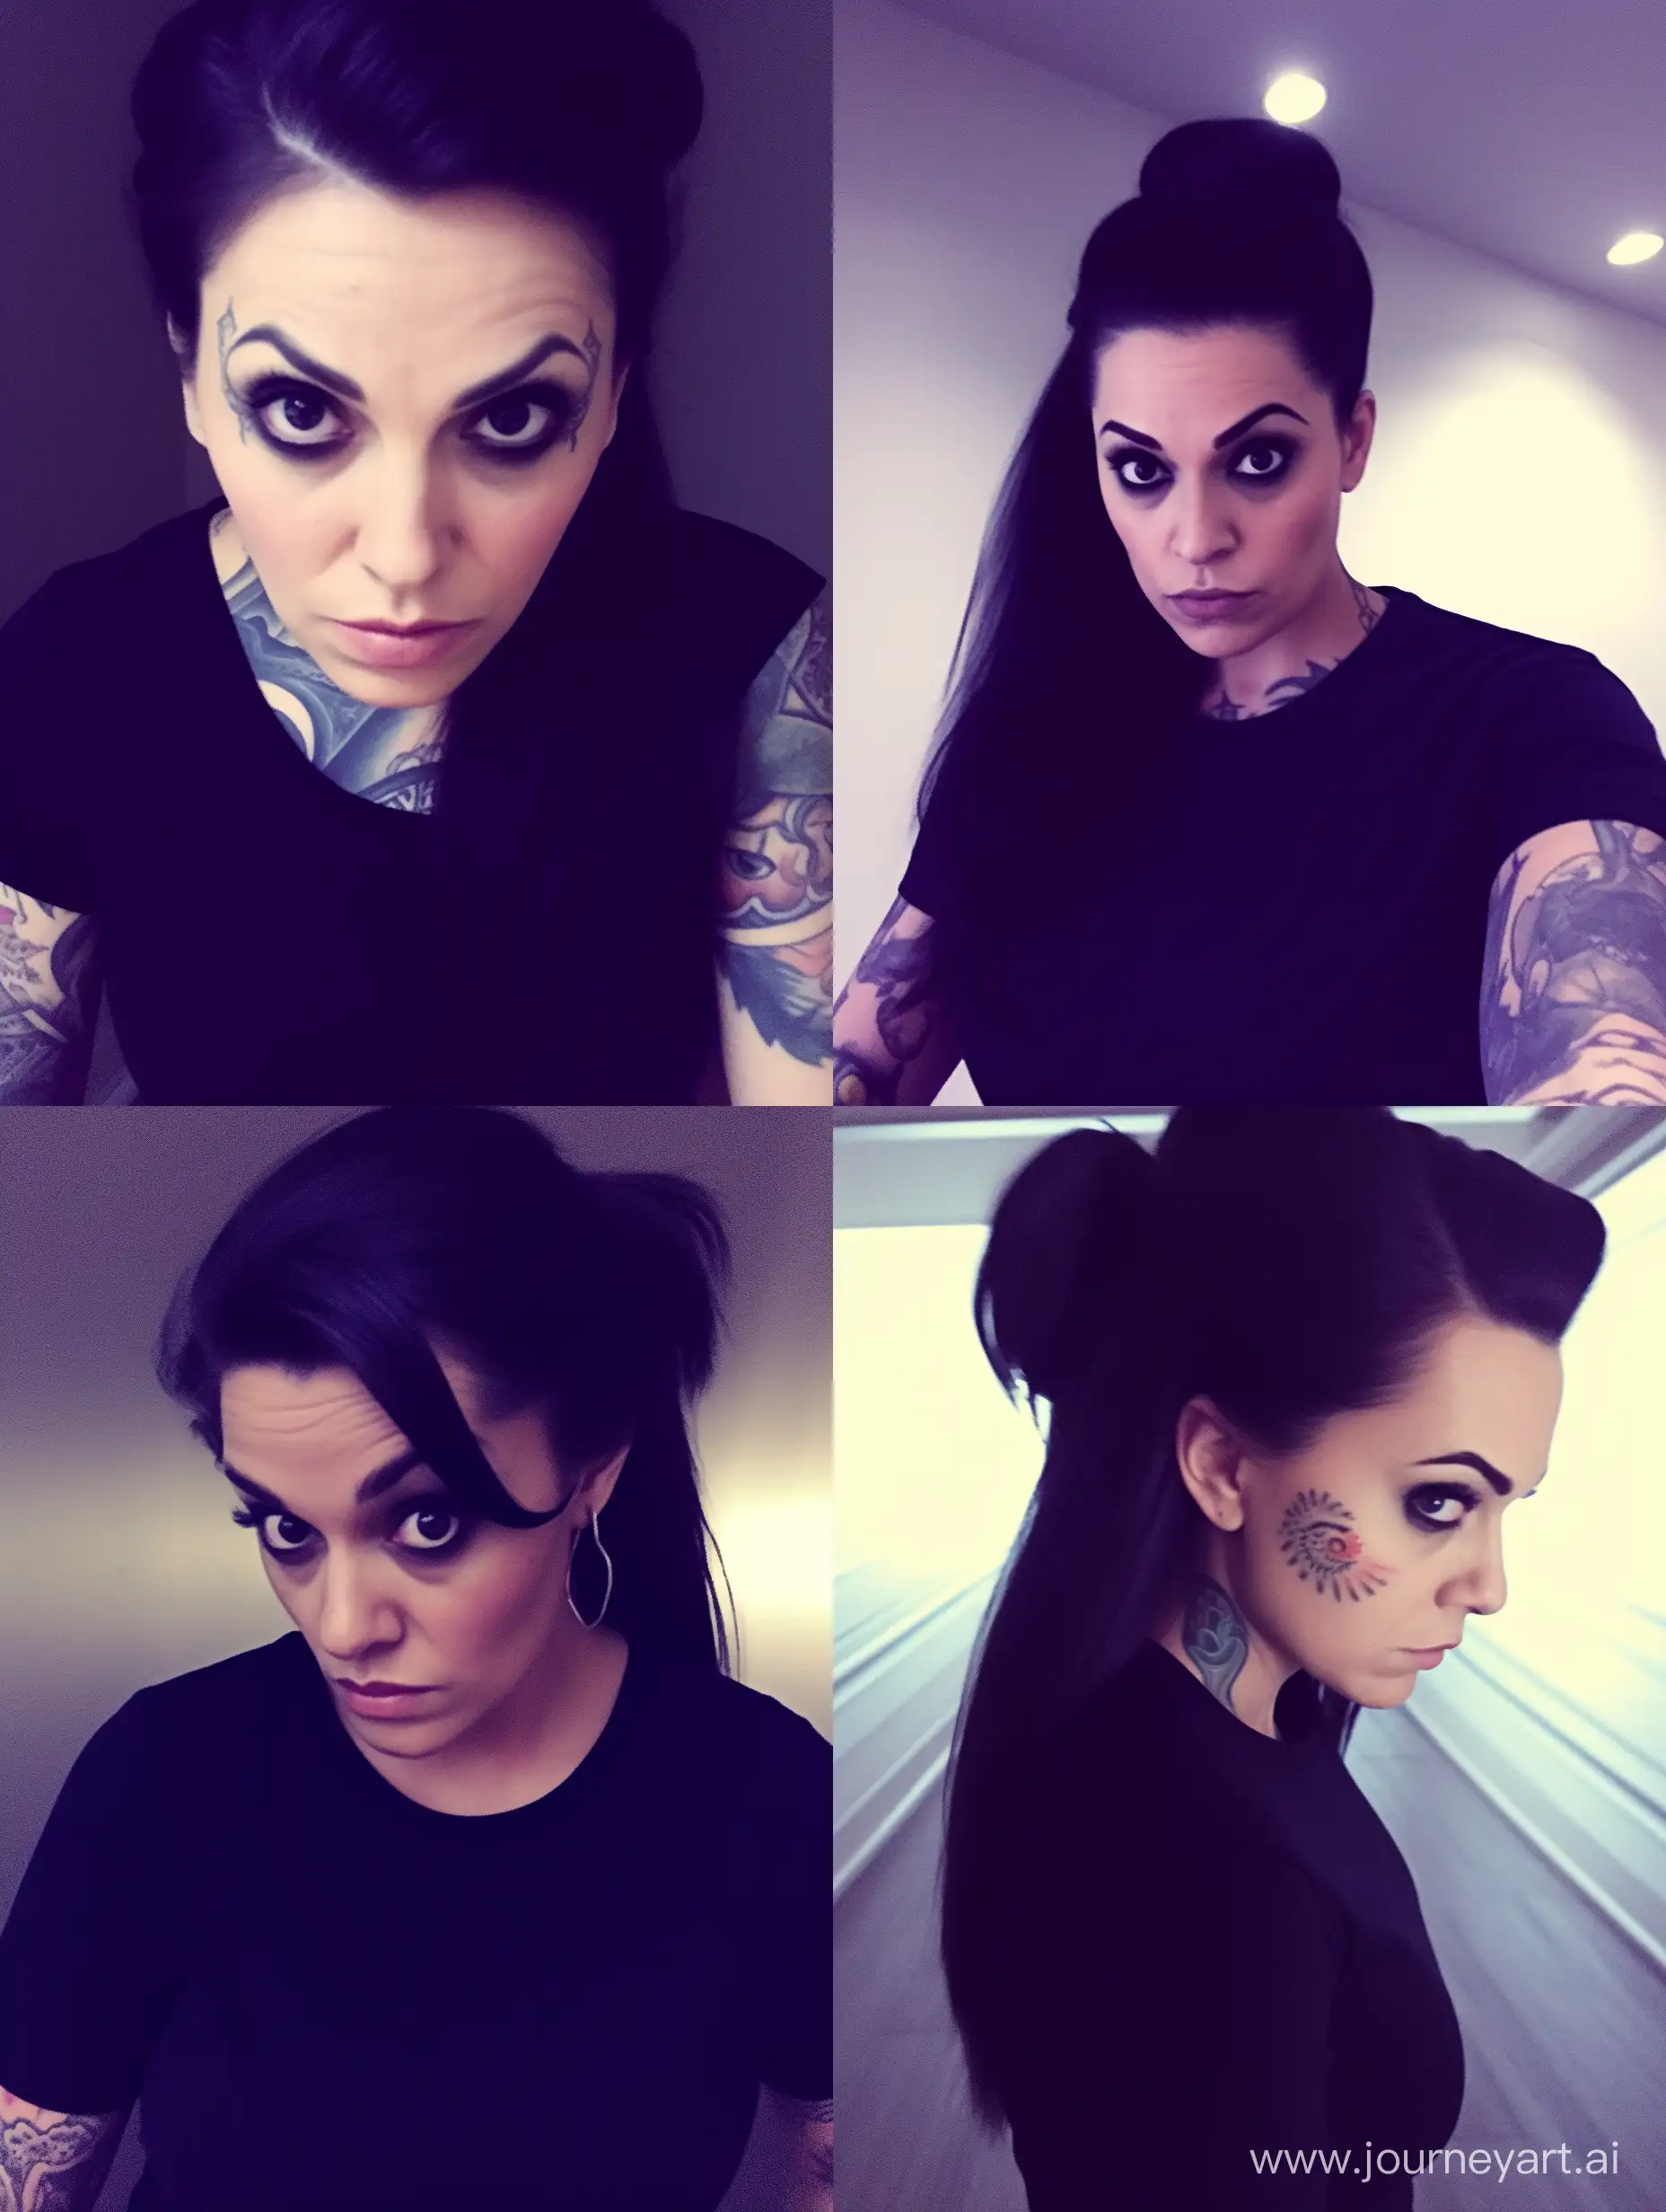 Interior selfie of a woman with black hair, tatoos and beautiful eyes, shot on a low camera quality phone